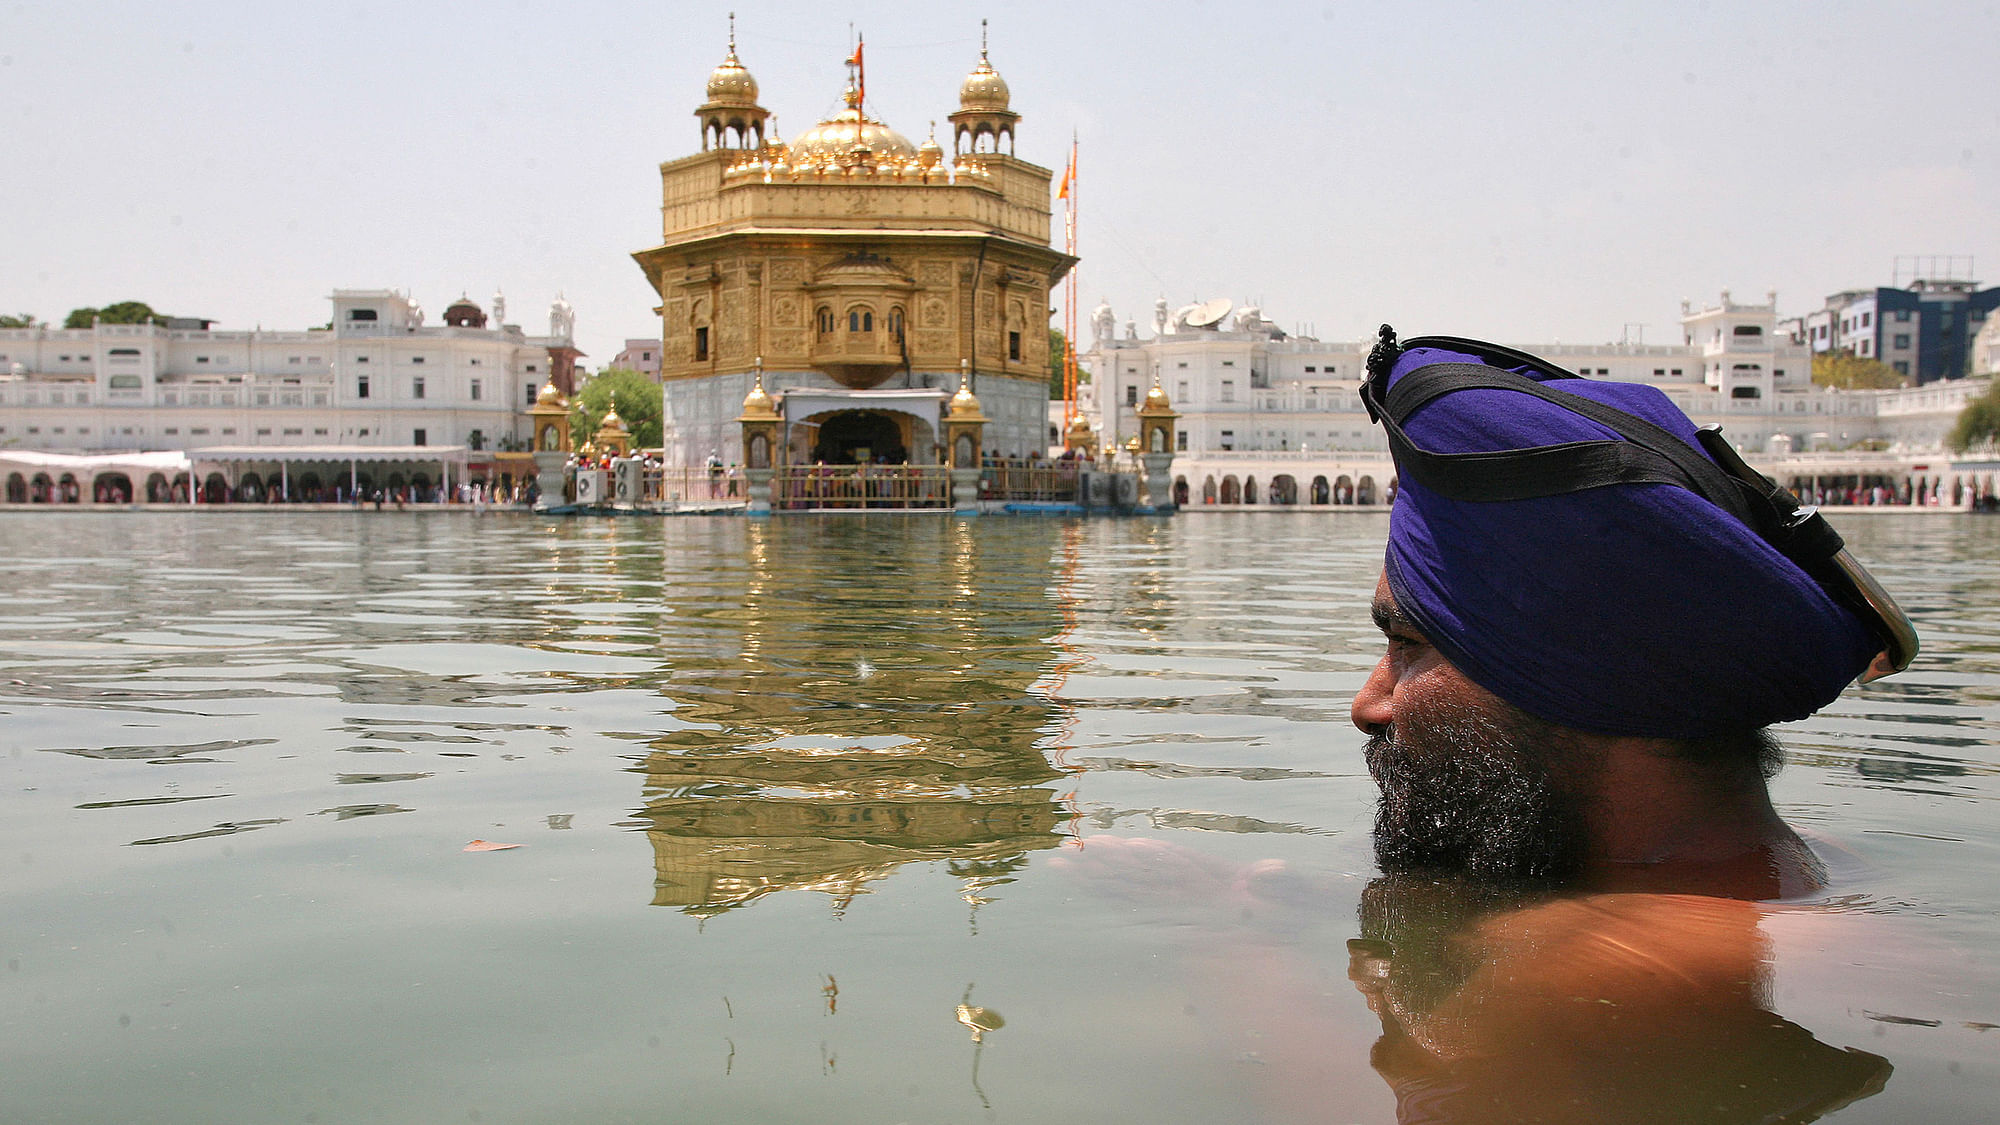 A devotee at the Golden Temple, Amritsar.